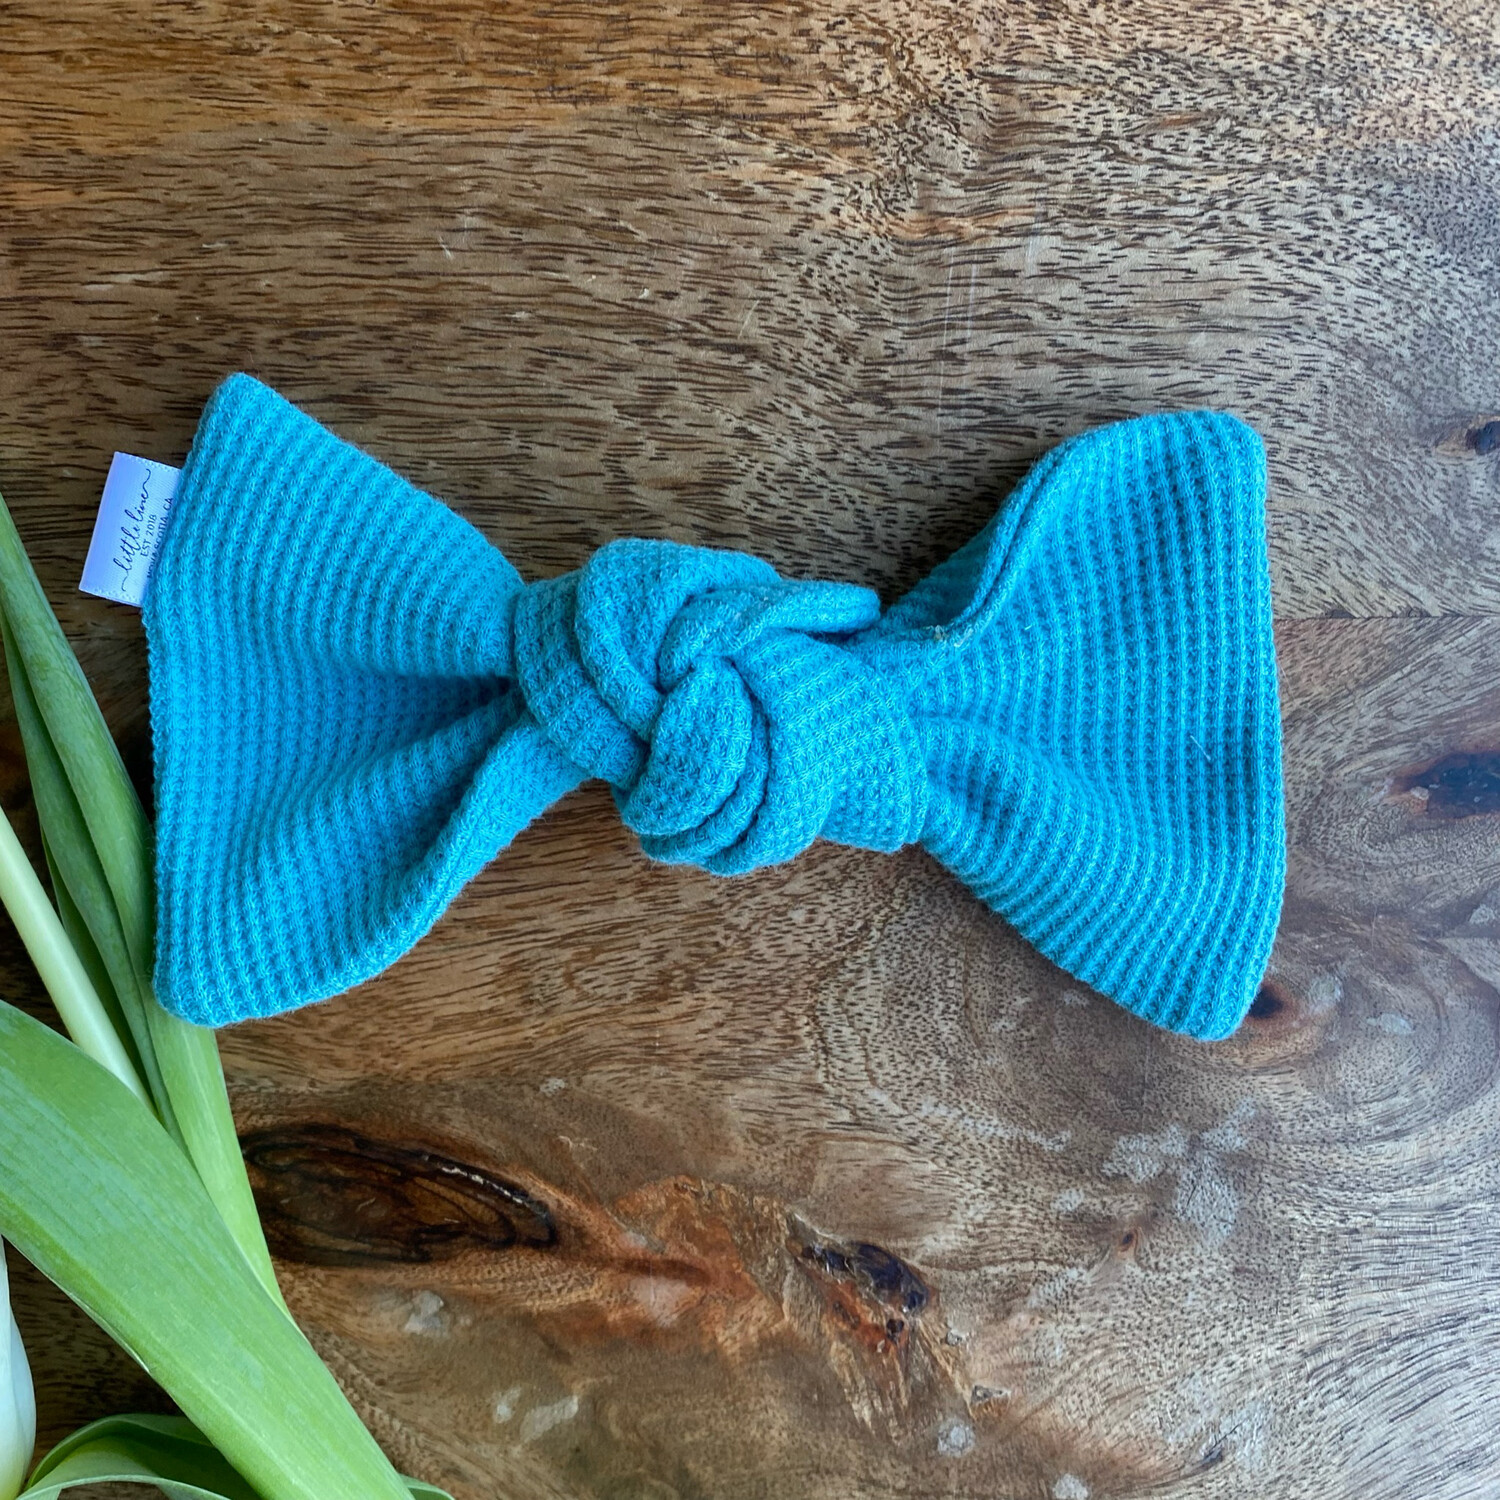 ASPEN KNOTTED BOW TIE